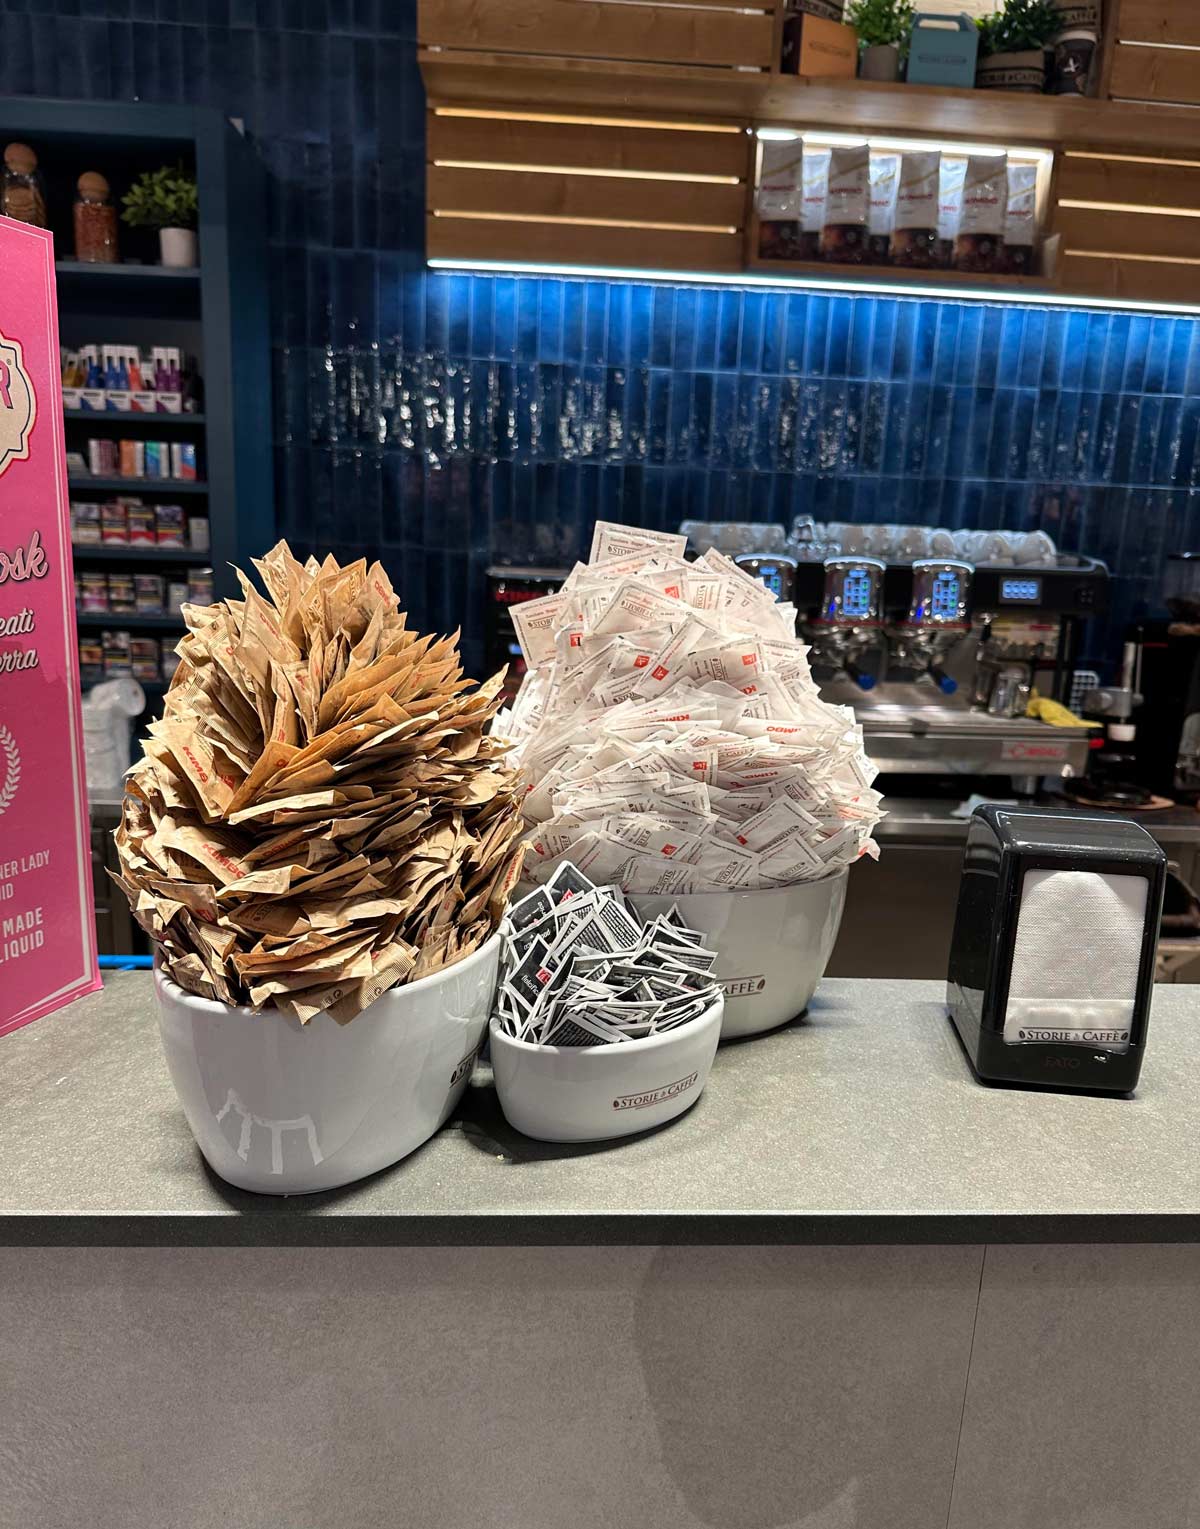 The sugar bowls at a Italian rest stop coffee bar